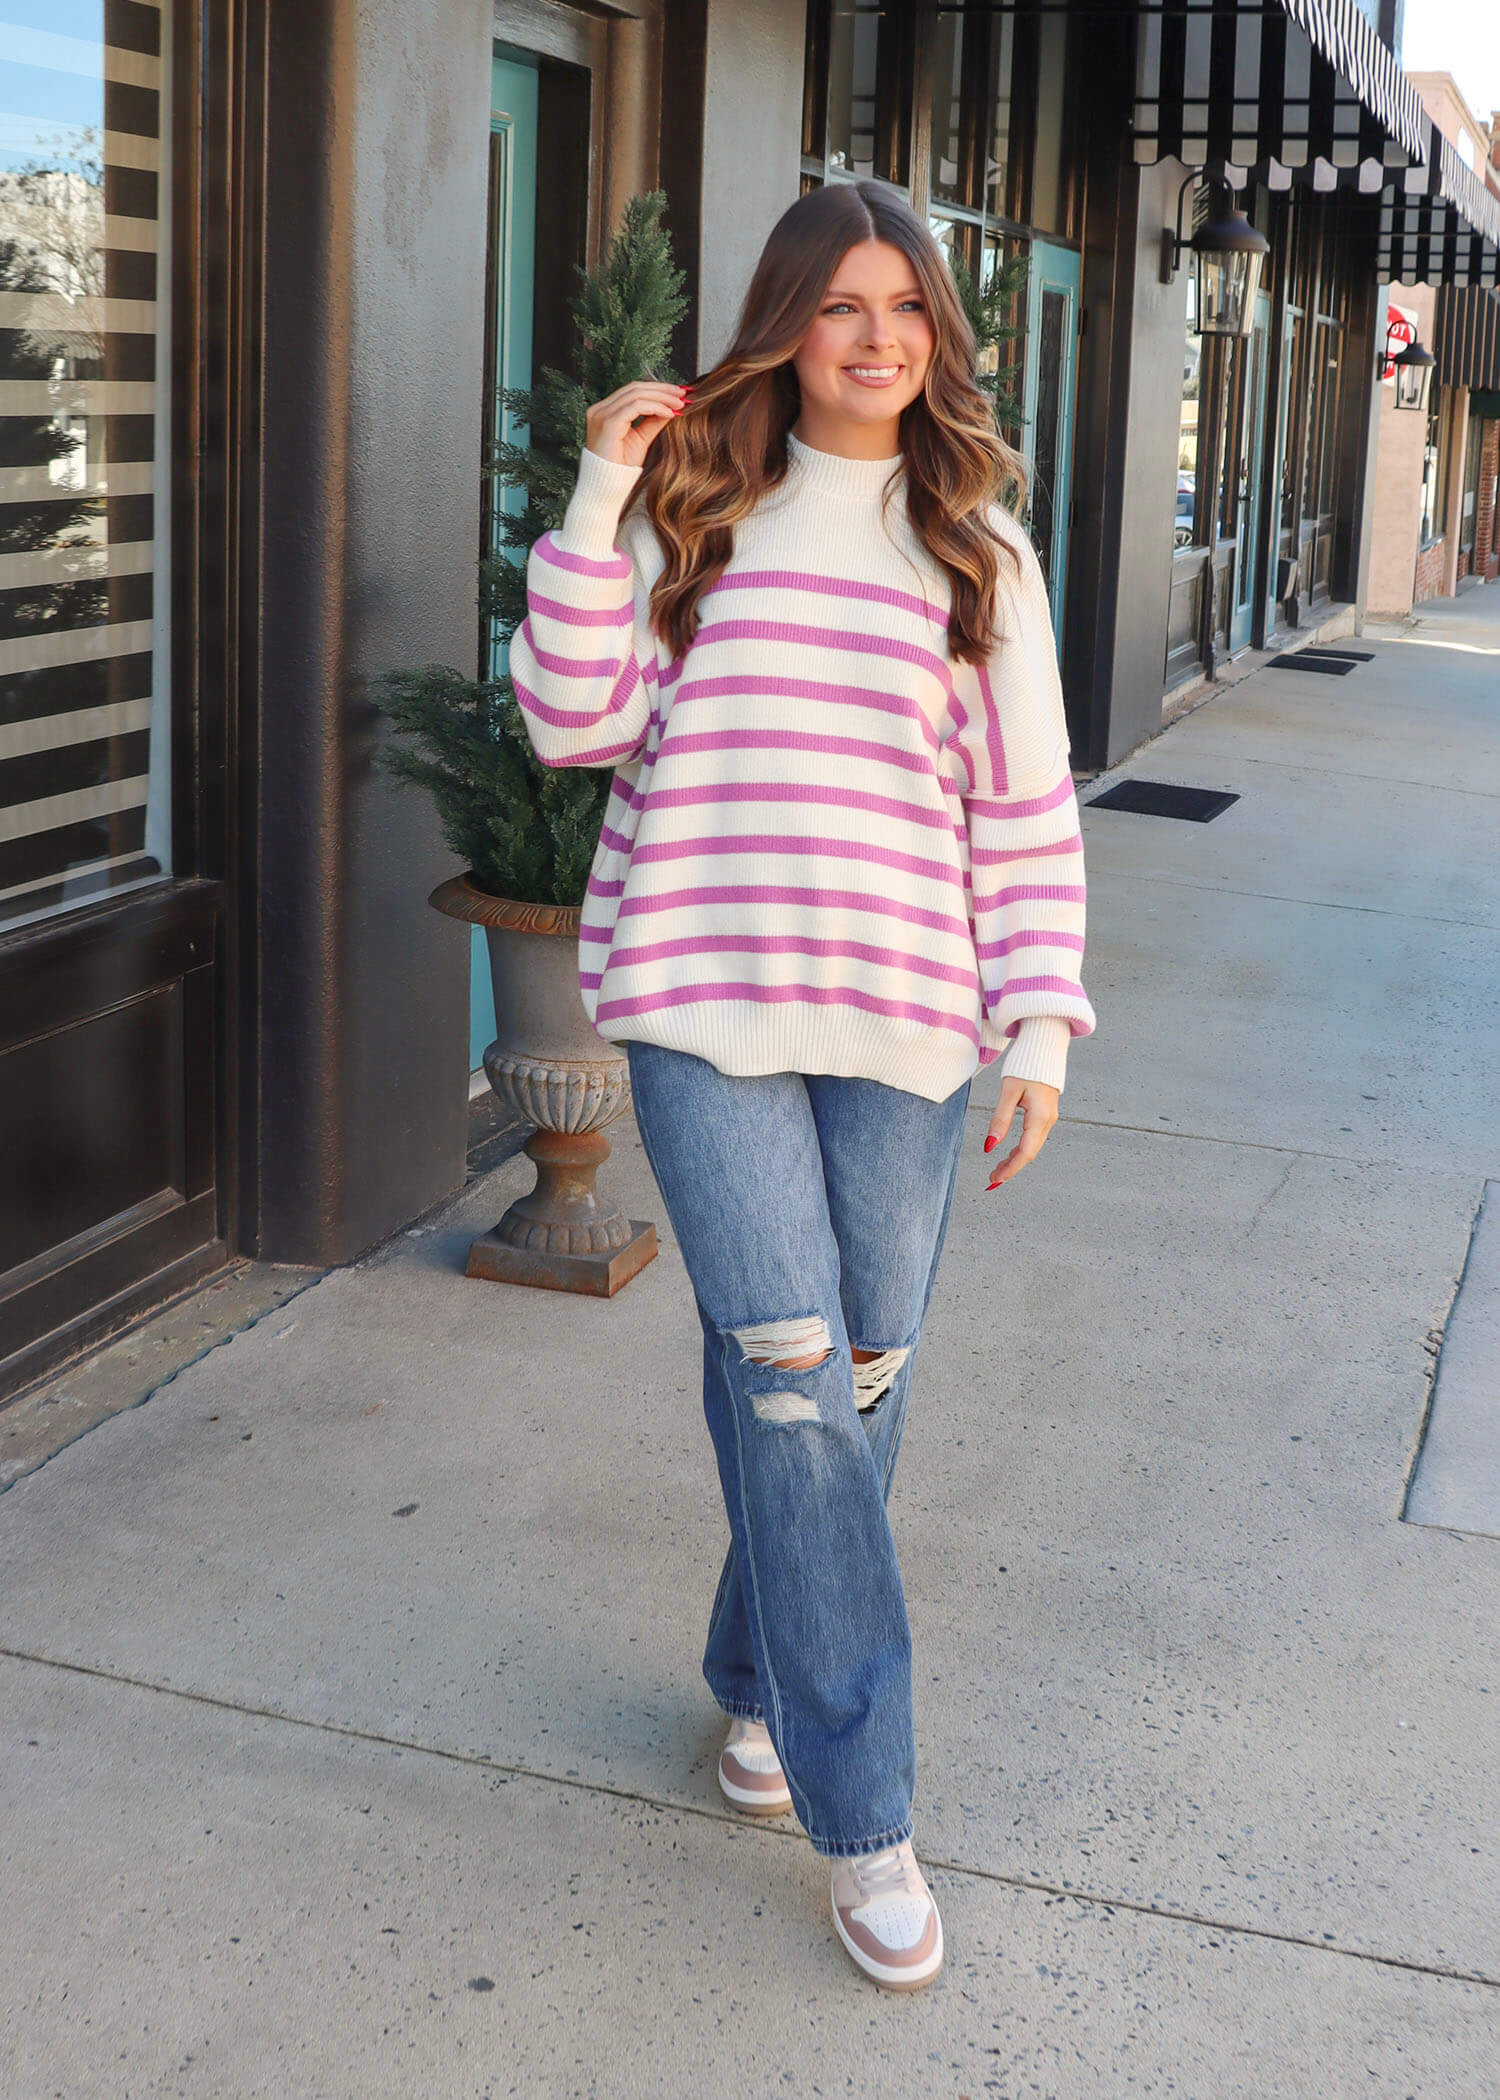 Read Between The Lines Oversized Sweater - White/Pink